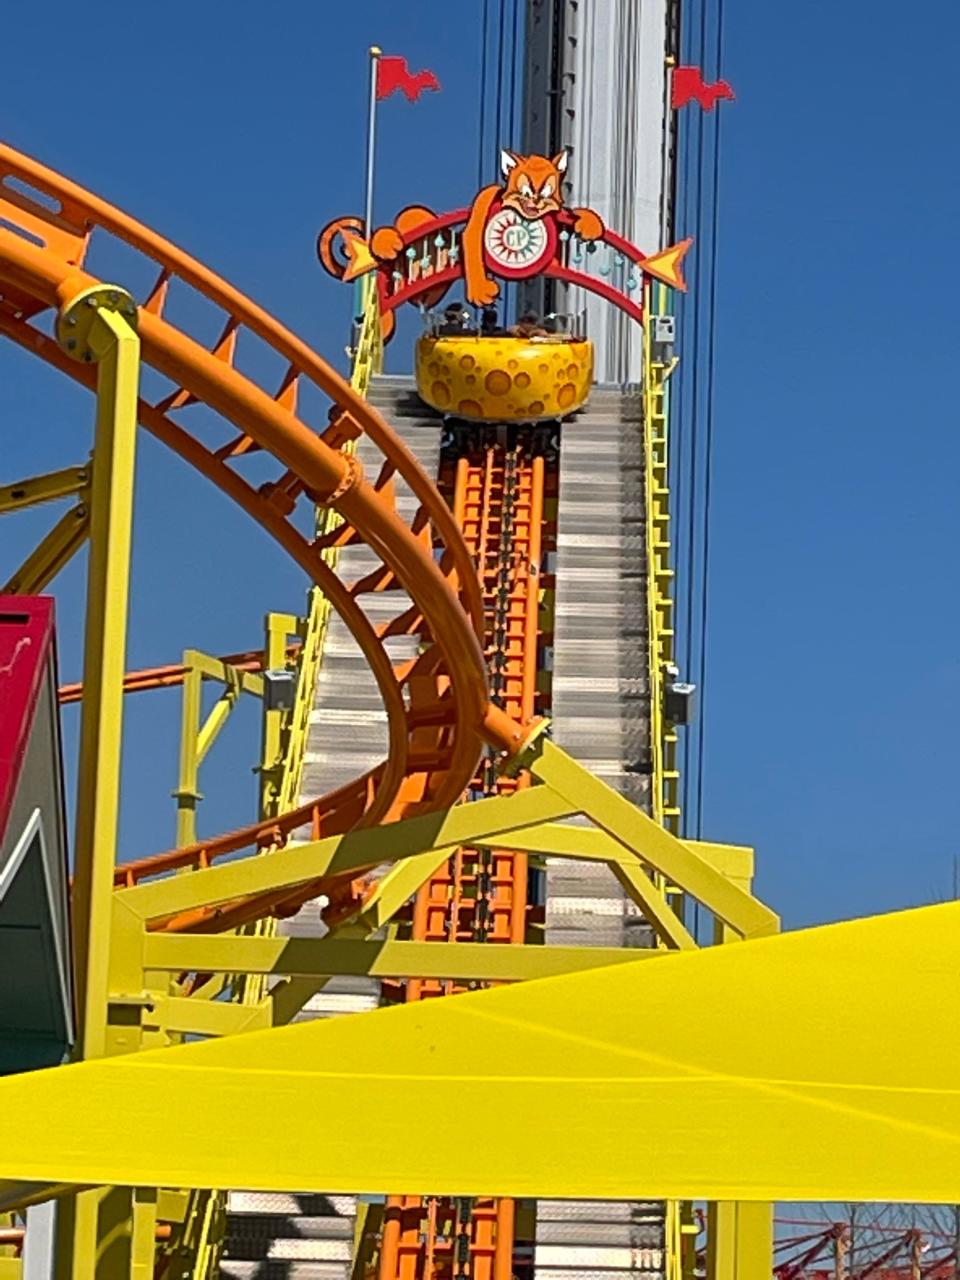 Cedar Point's new Wild Mouse features a nod to the park's old Wildcat roller coaster at the top of the lifthill.